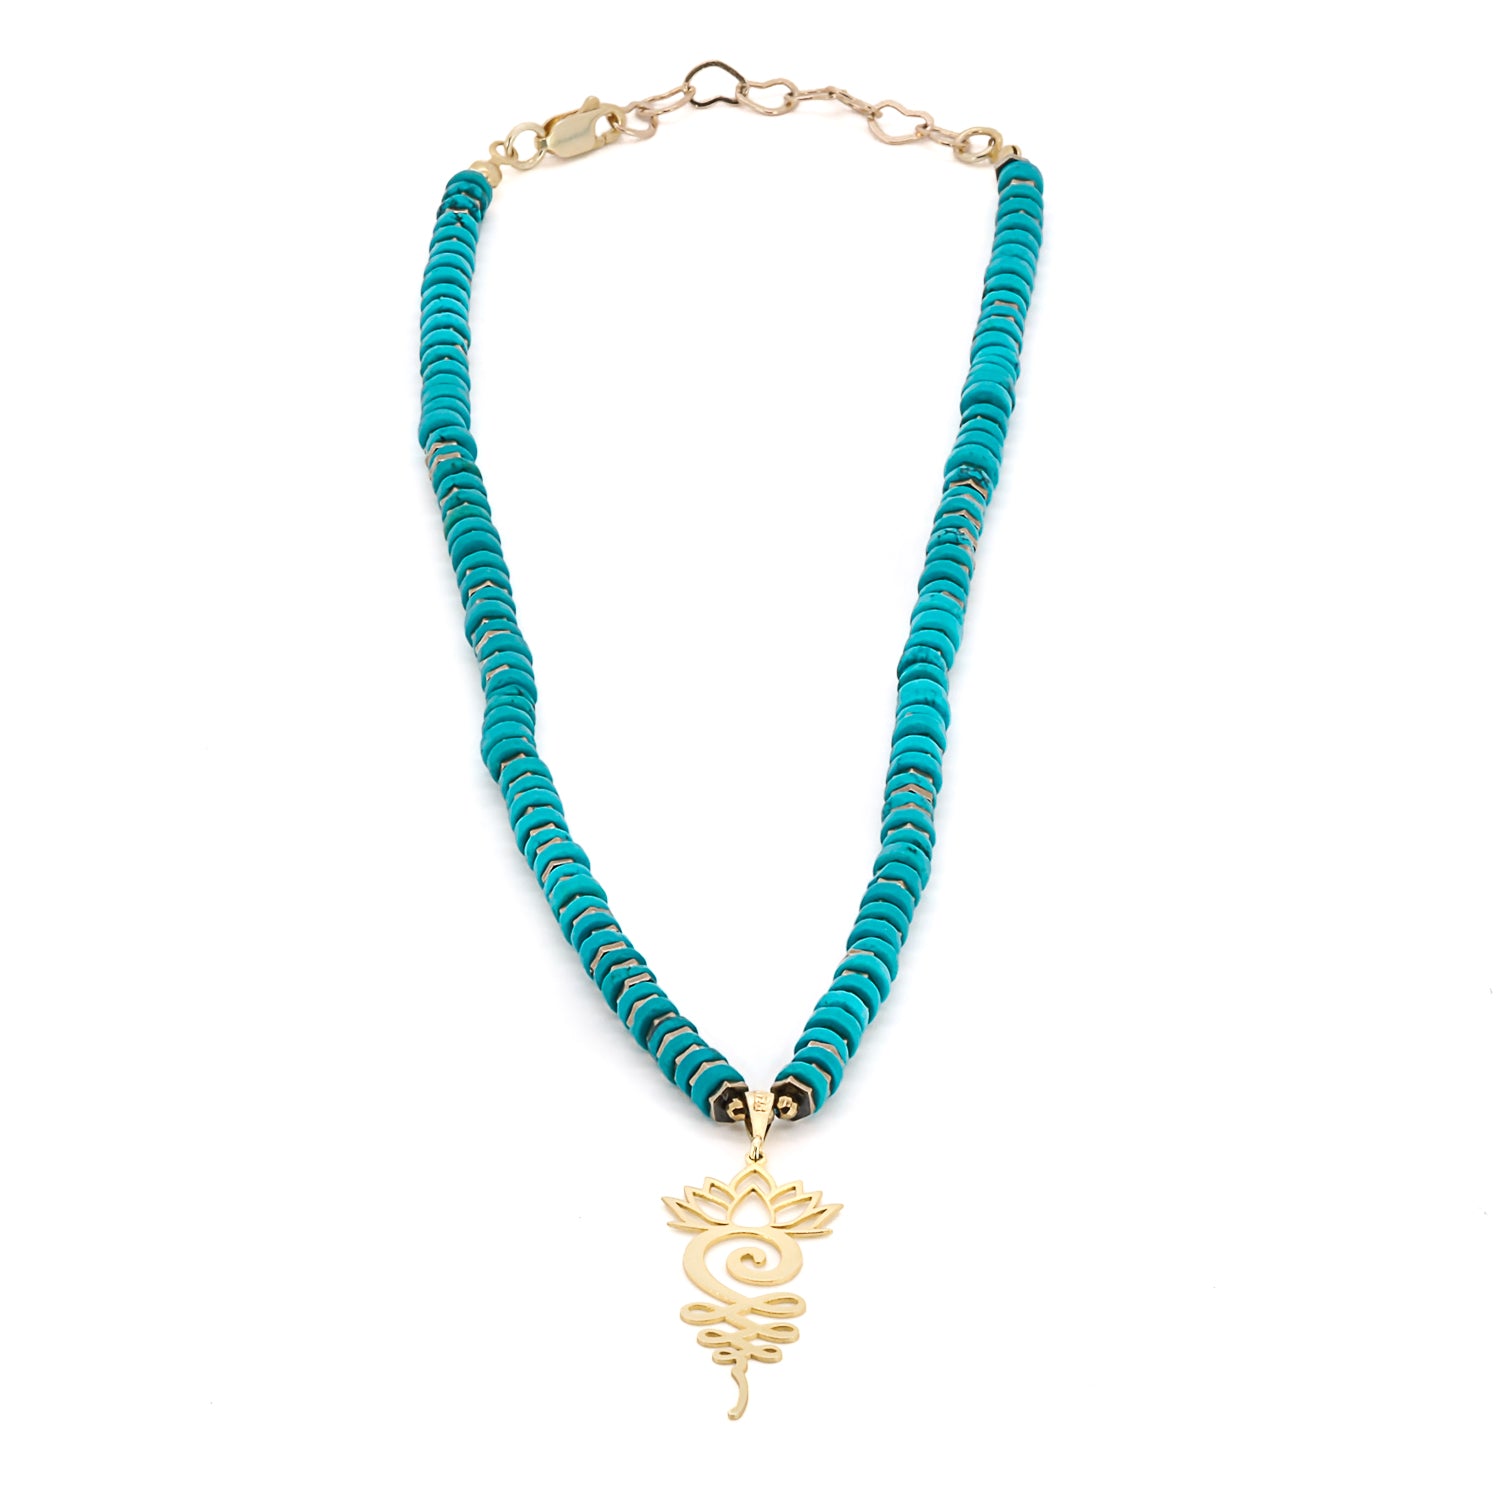 The vibrant turquoise stone beads of the Turquoise Unalome Serenity Necklace